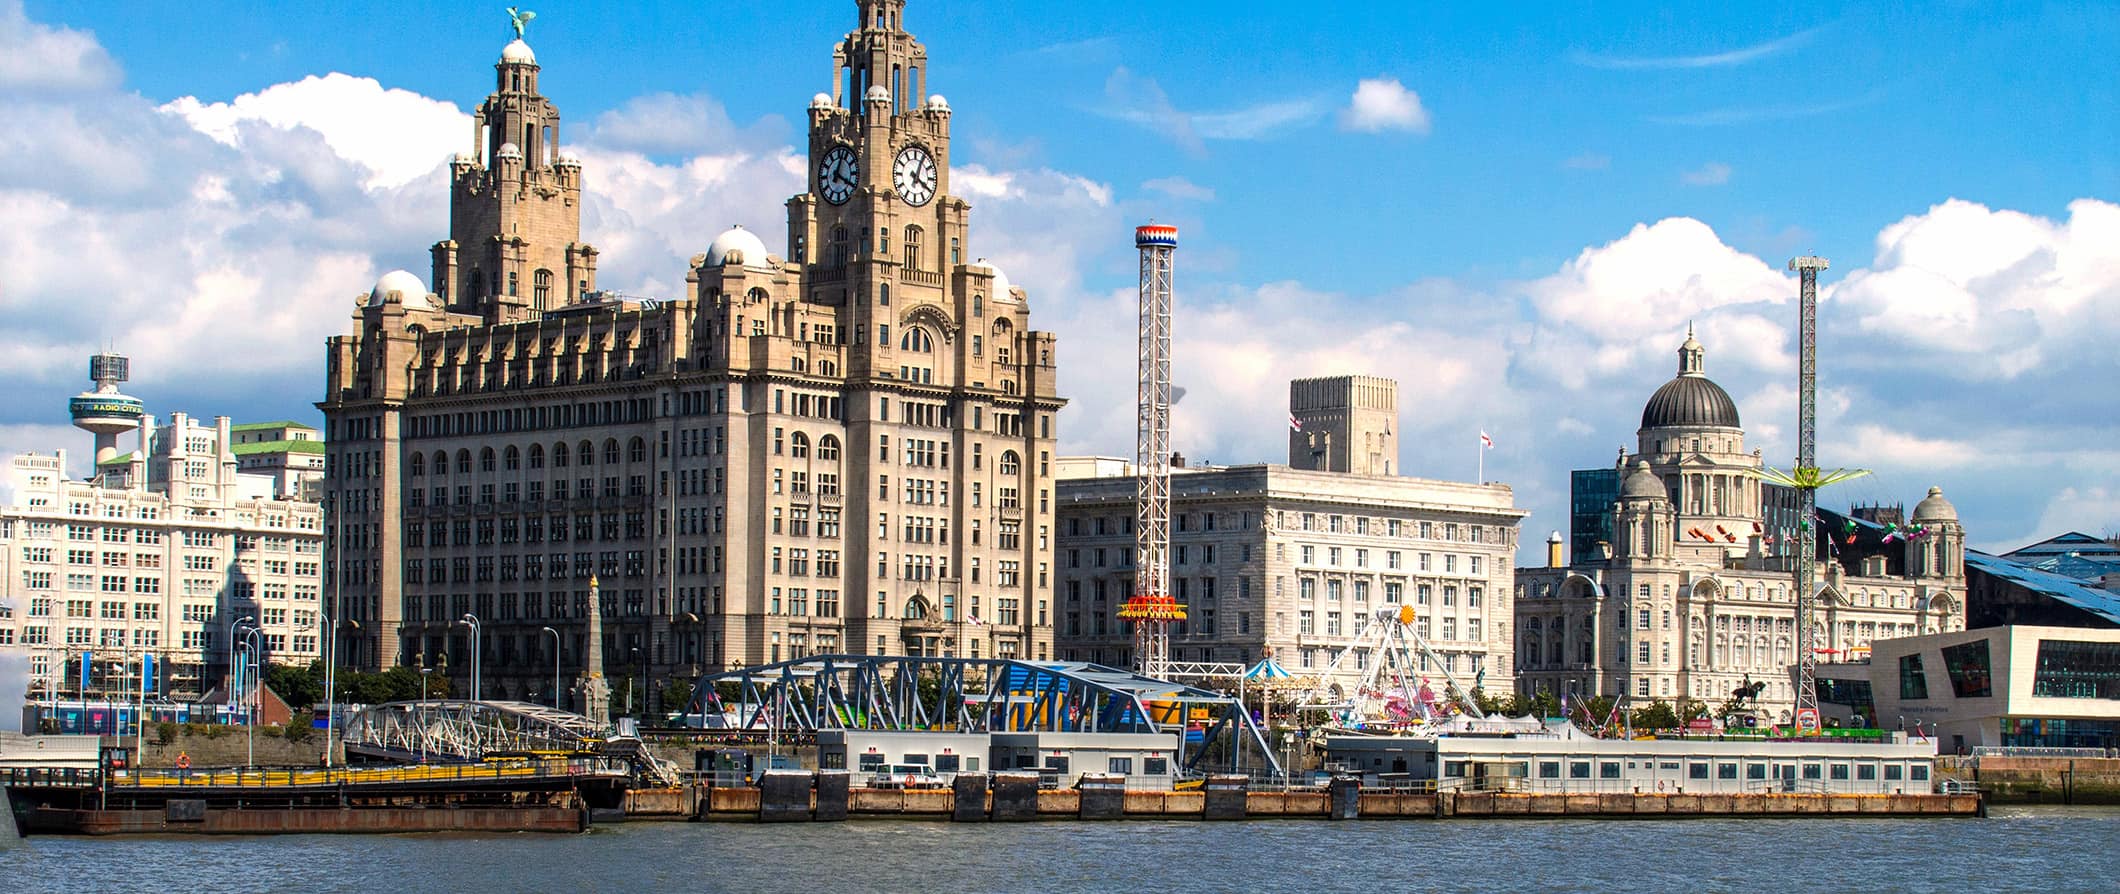 A scenic view of Liverpool, UK as seen from the water